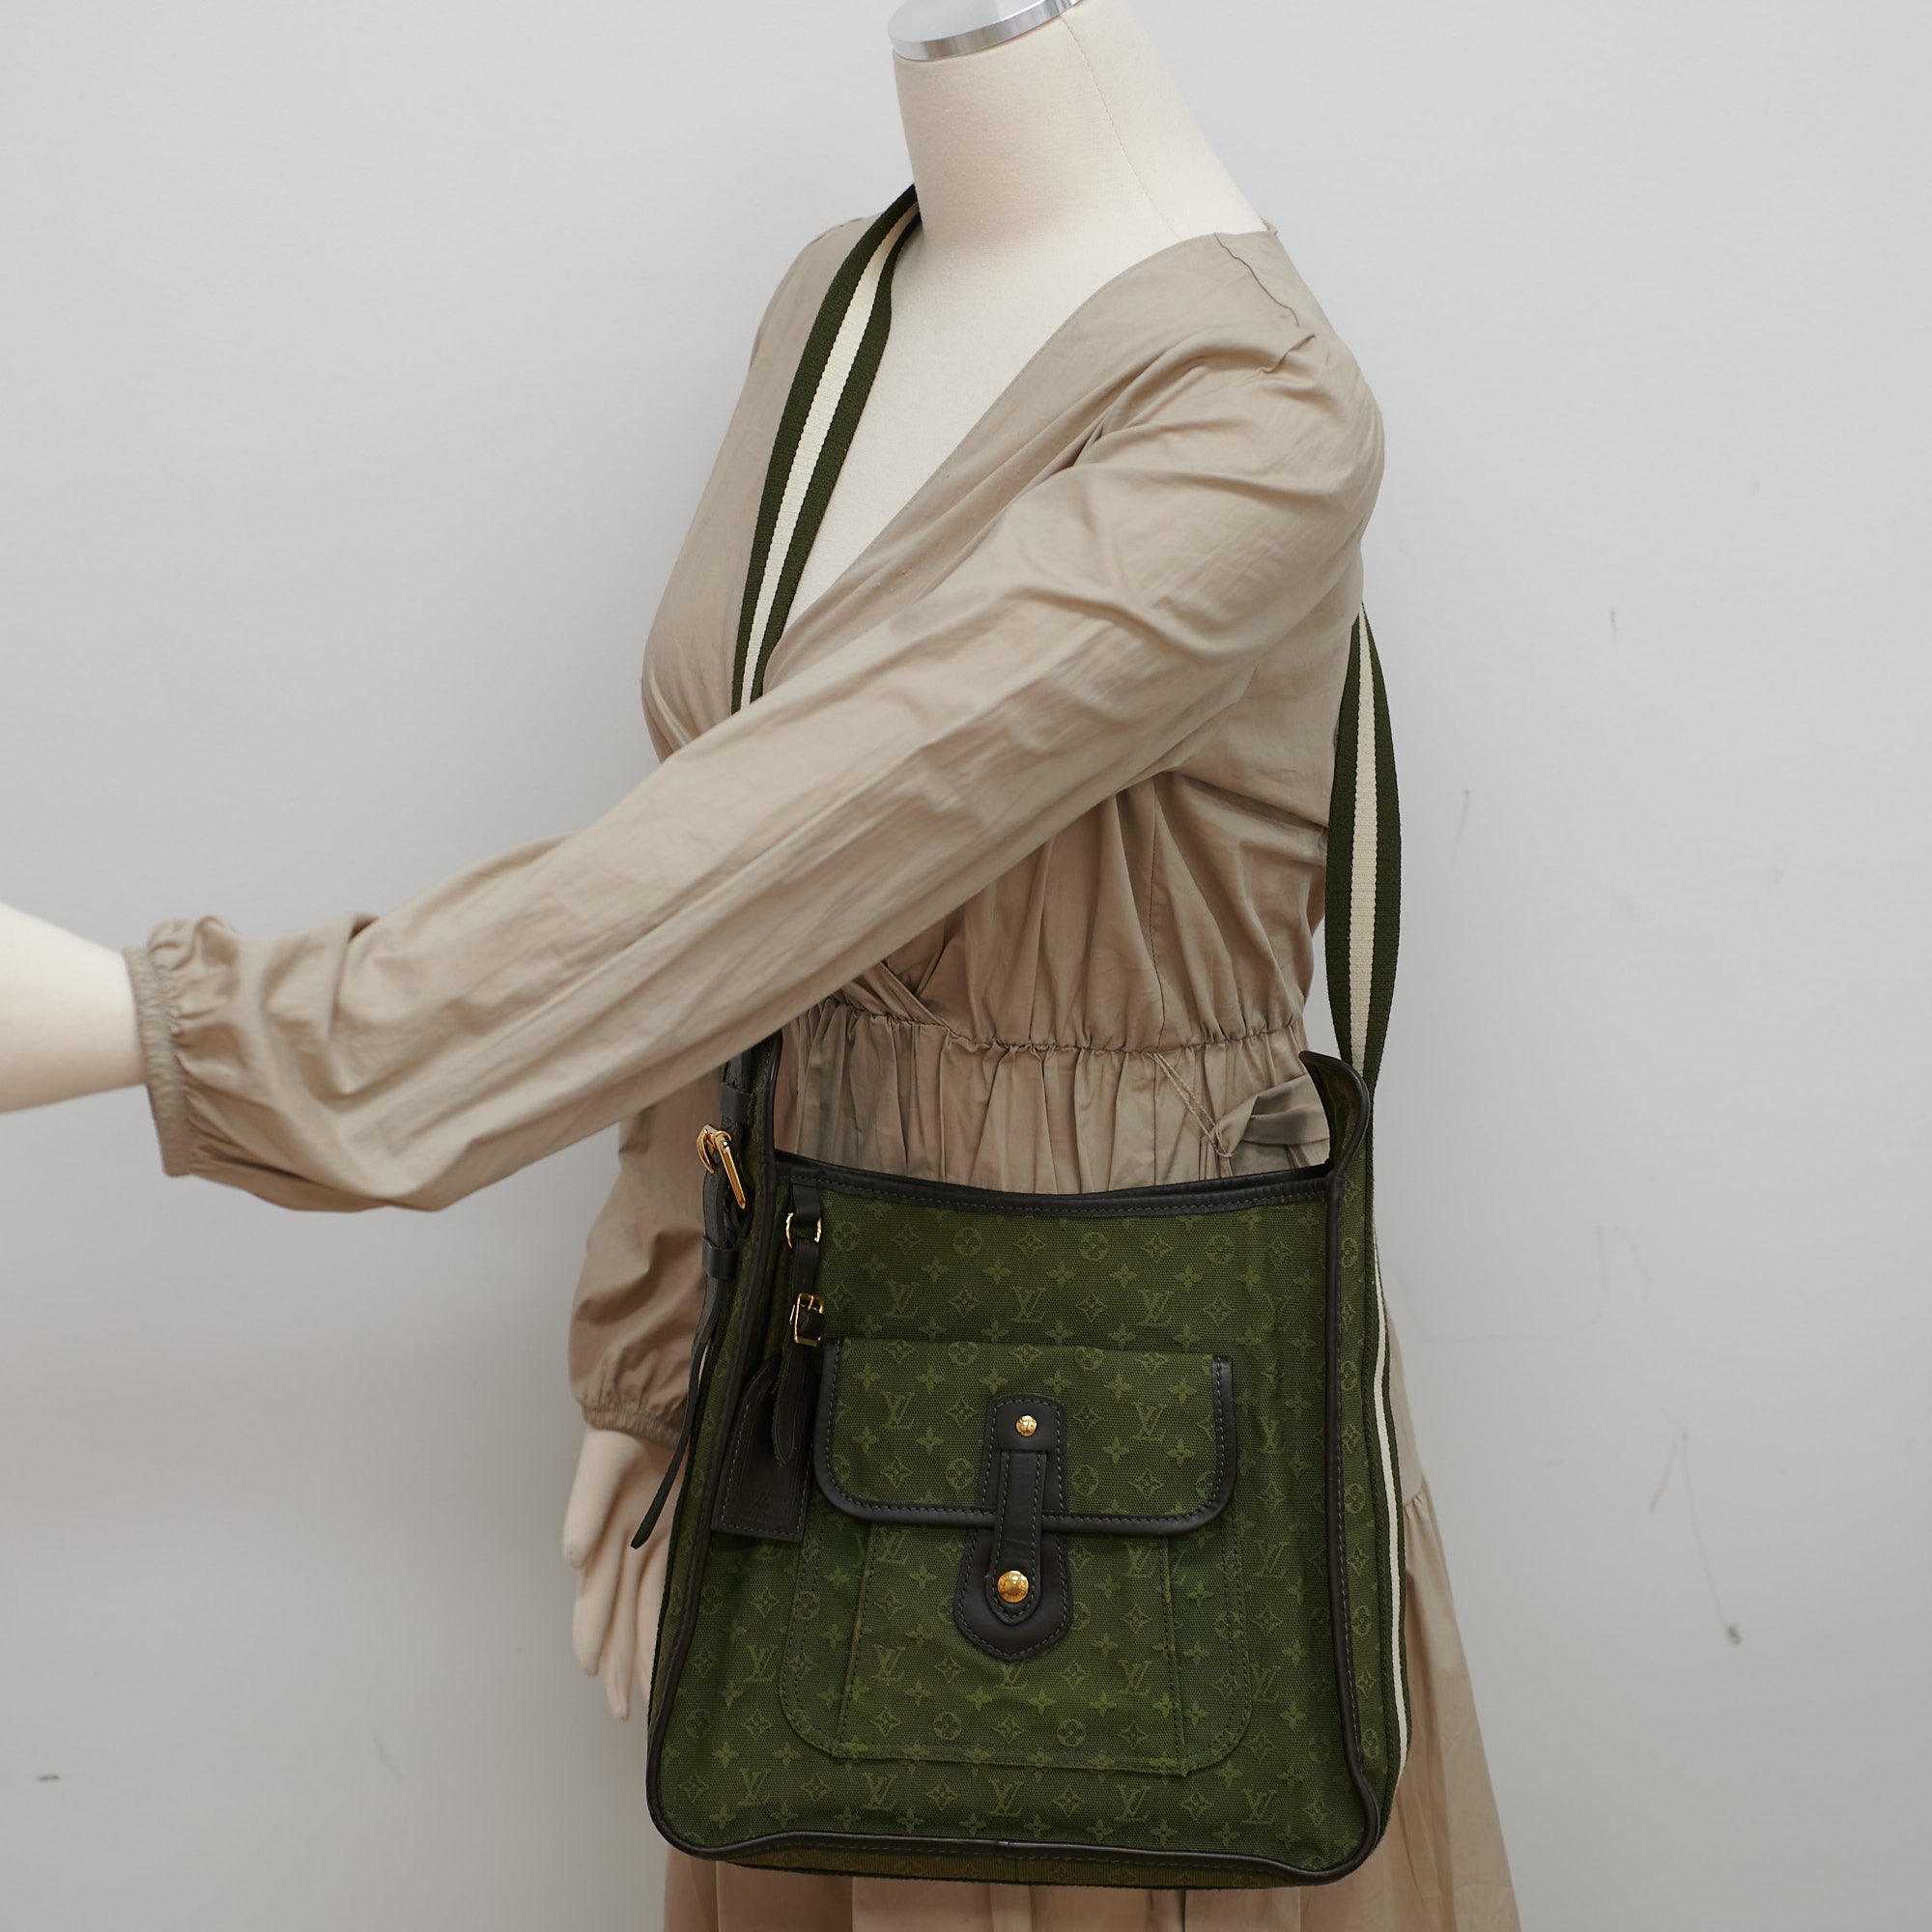 Sold at Auction: Louis Vuitton, LOUIS VUITTON MARY KATE DARK GREEN  MONOGRAMMED BAG